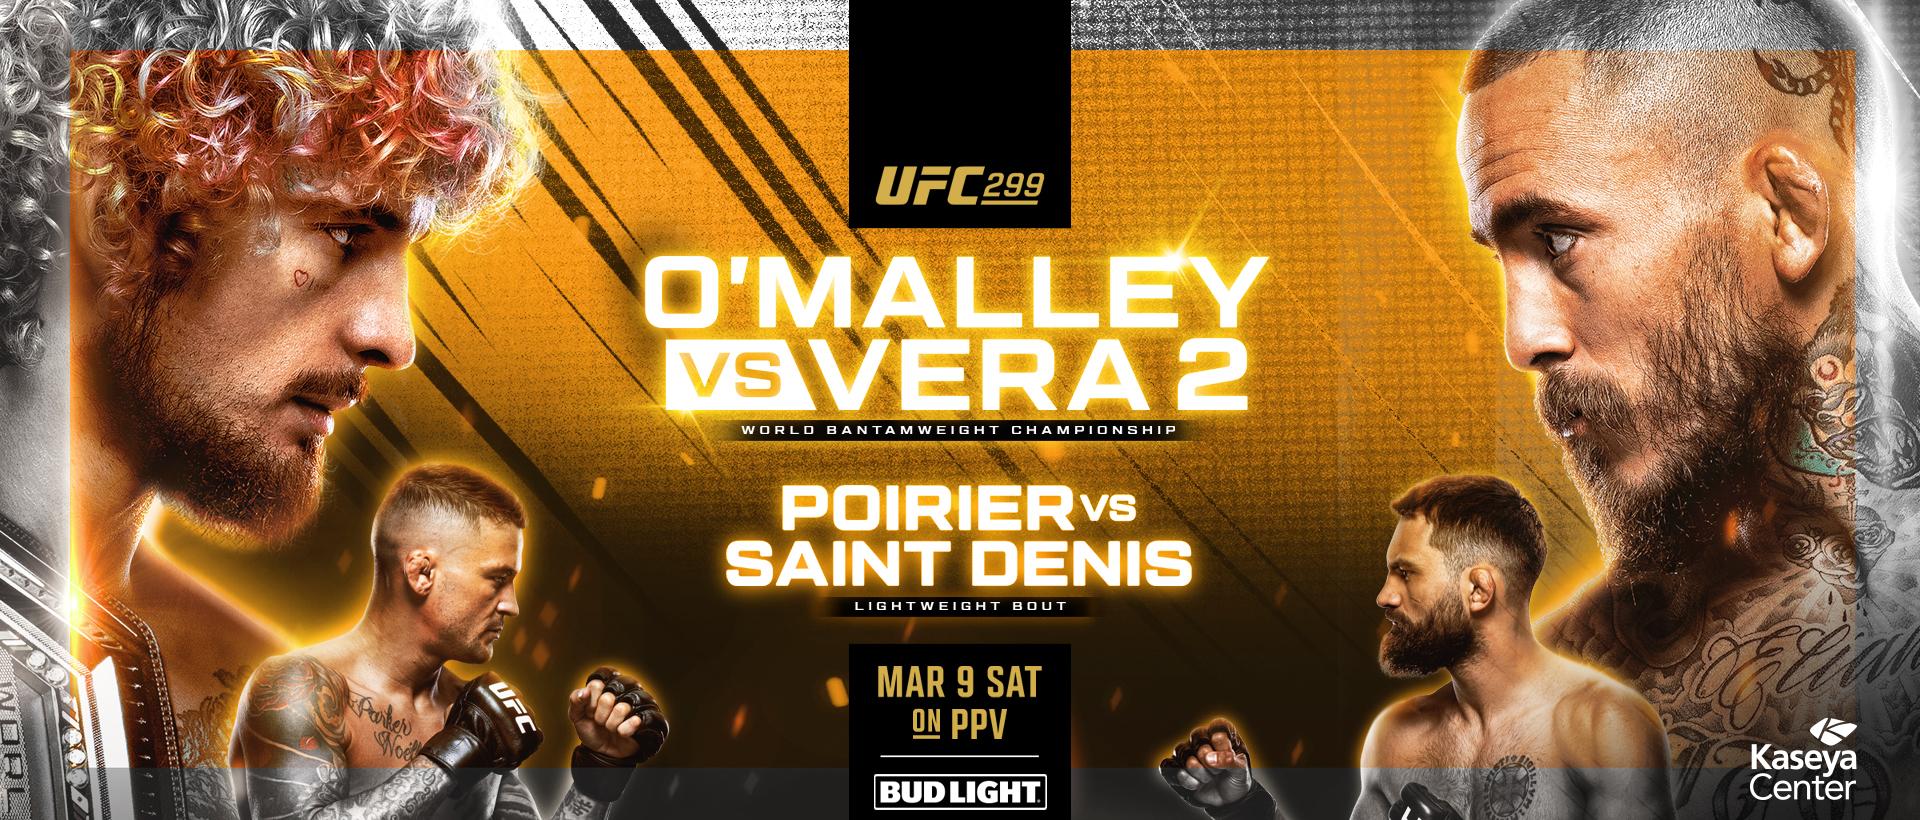 UFC 299: O'Malley vs Vera 2 prediction and best bets